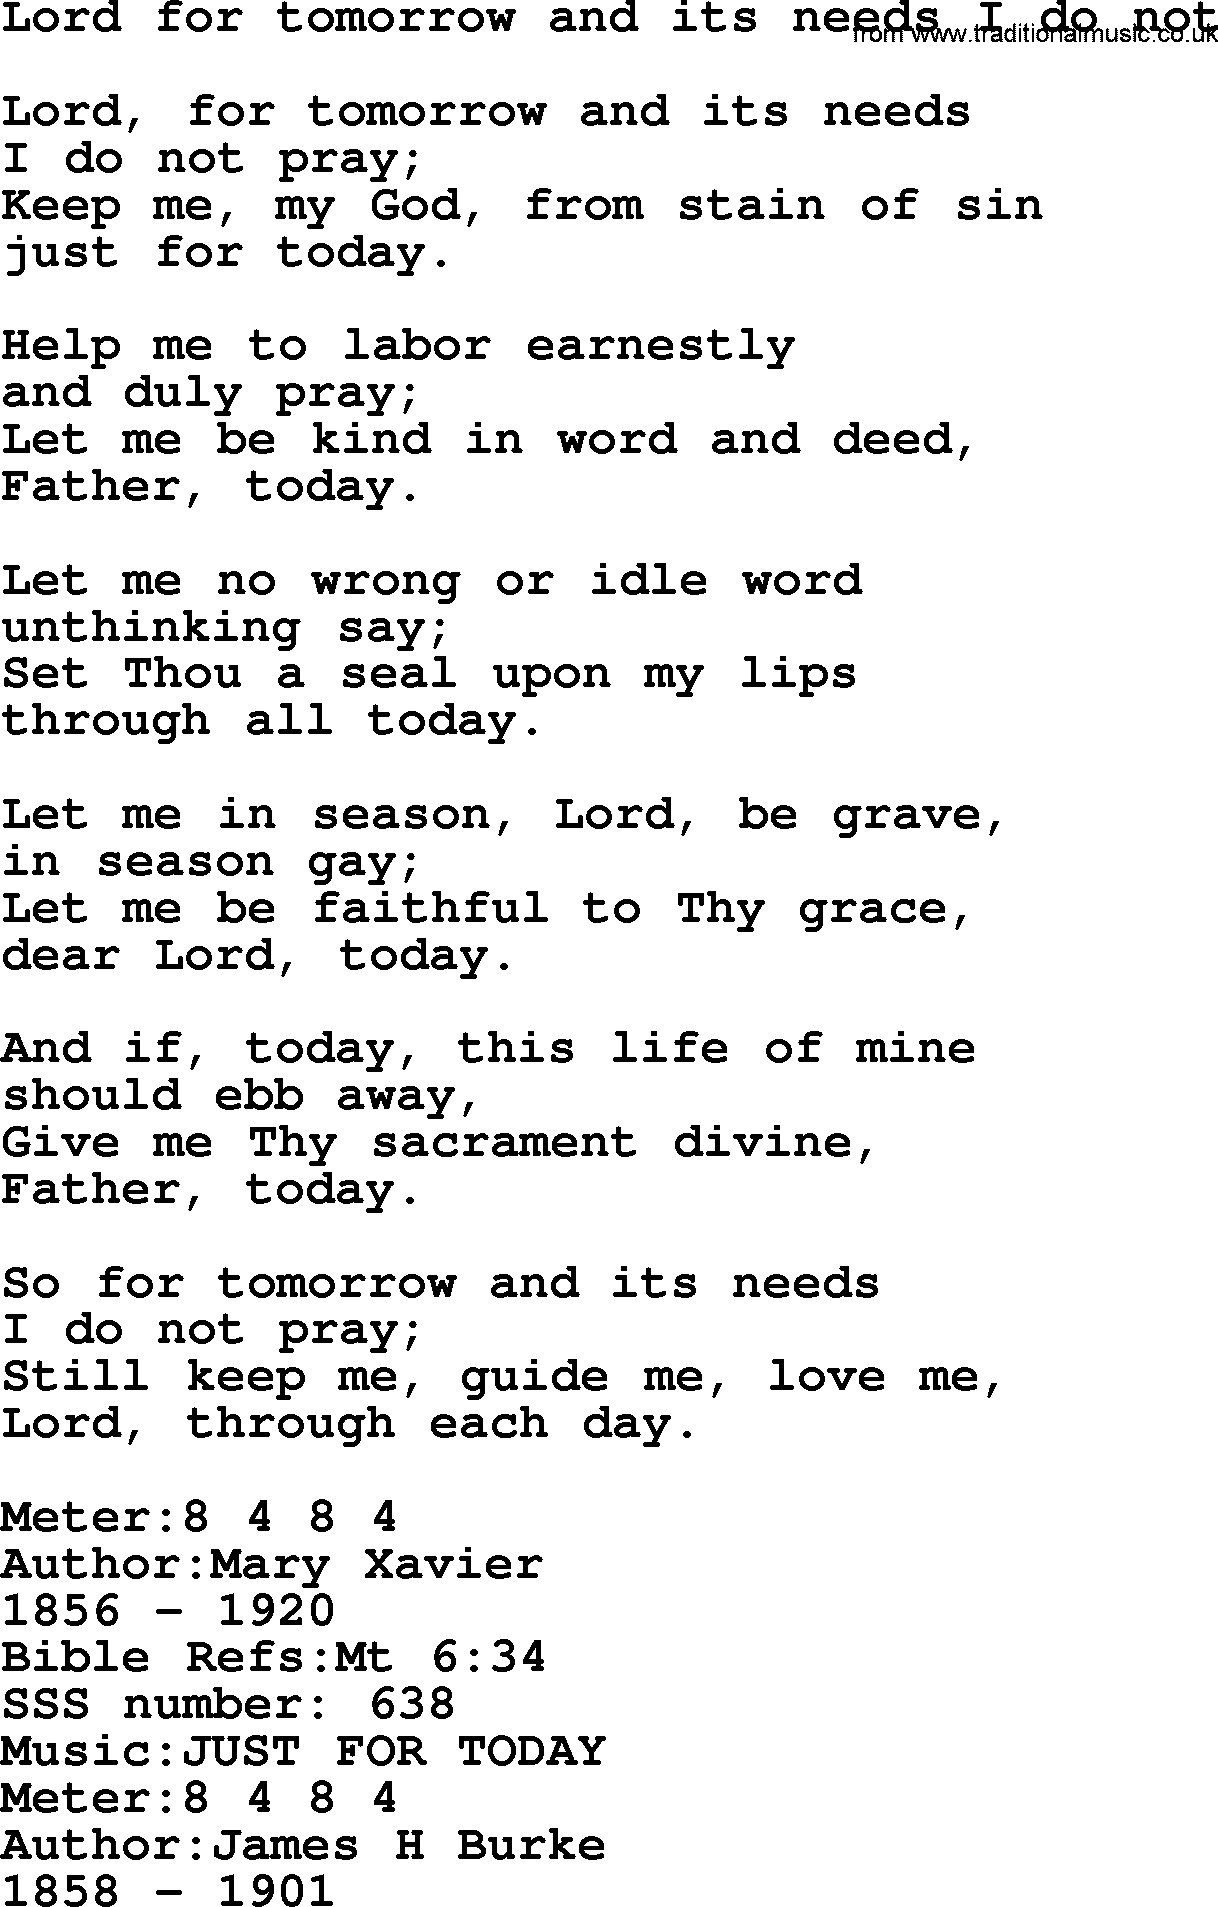 Sacred Songs and Solos complete, 1200 Hymns, title: Lord For Tomorrow And Its Needs I Do Not, lyrics and PDF